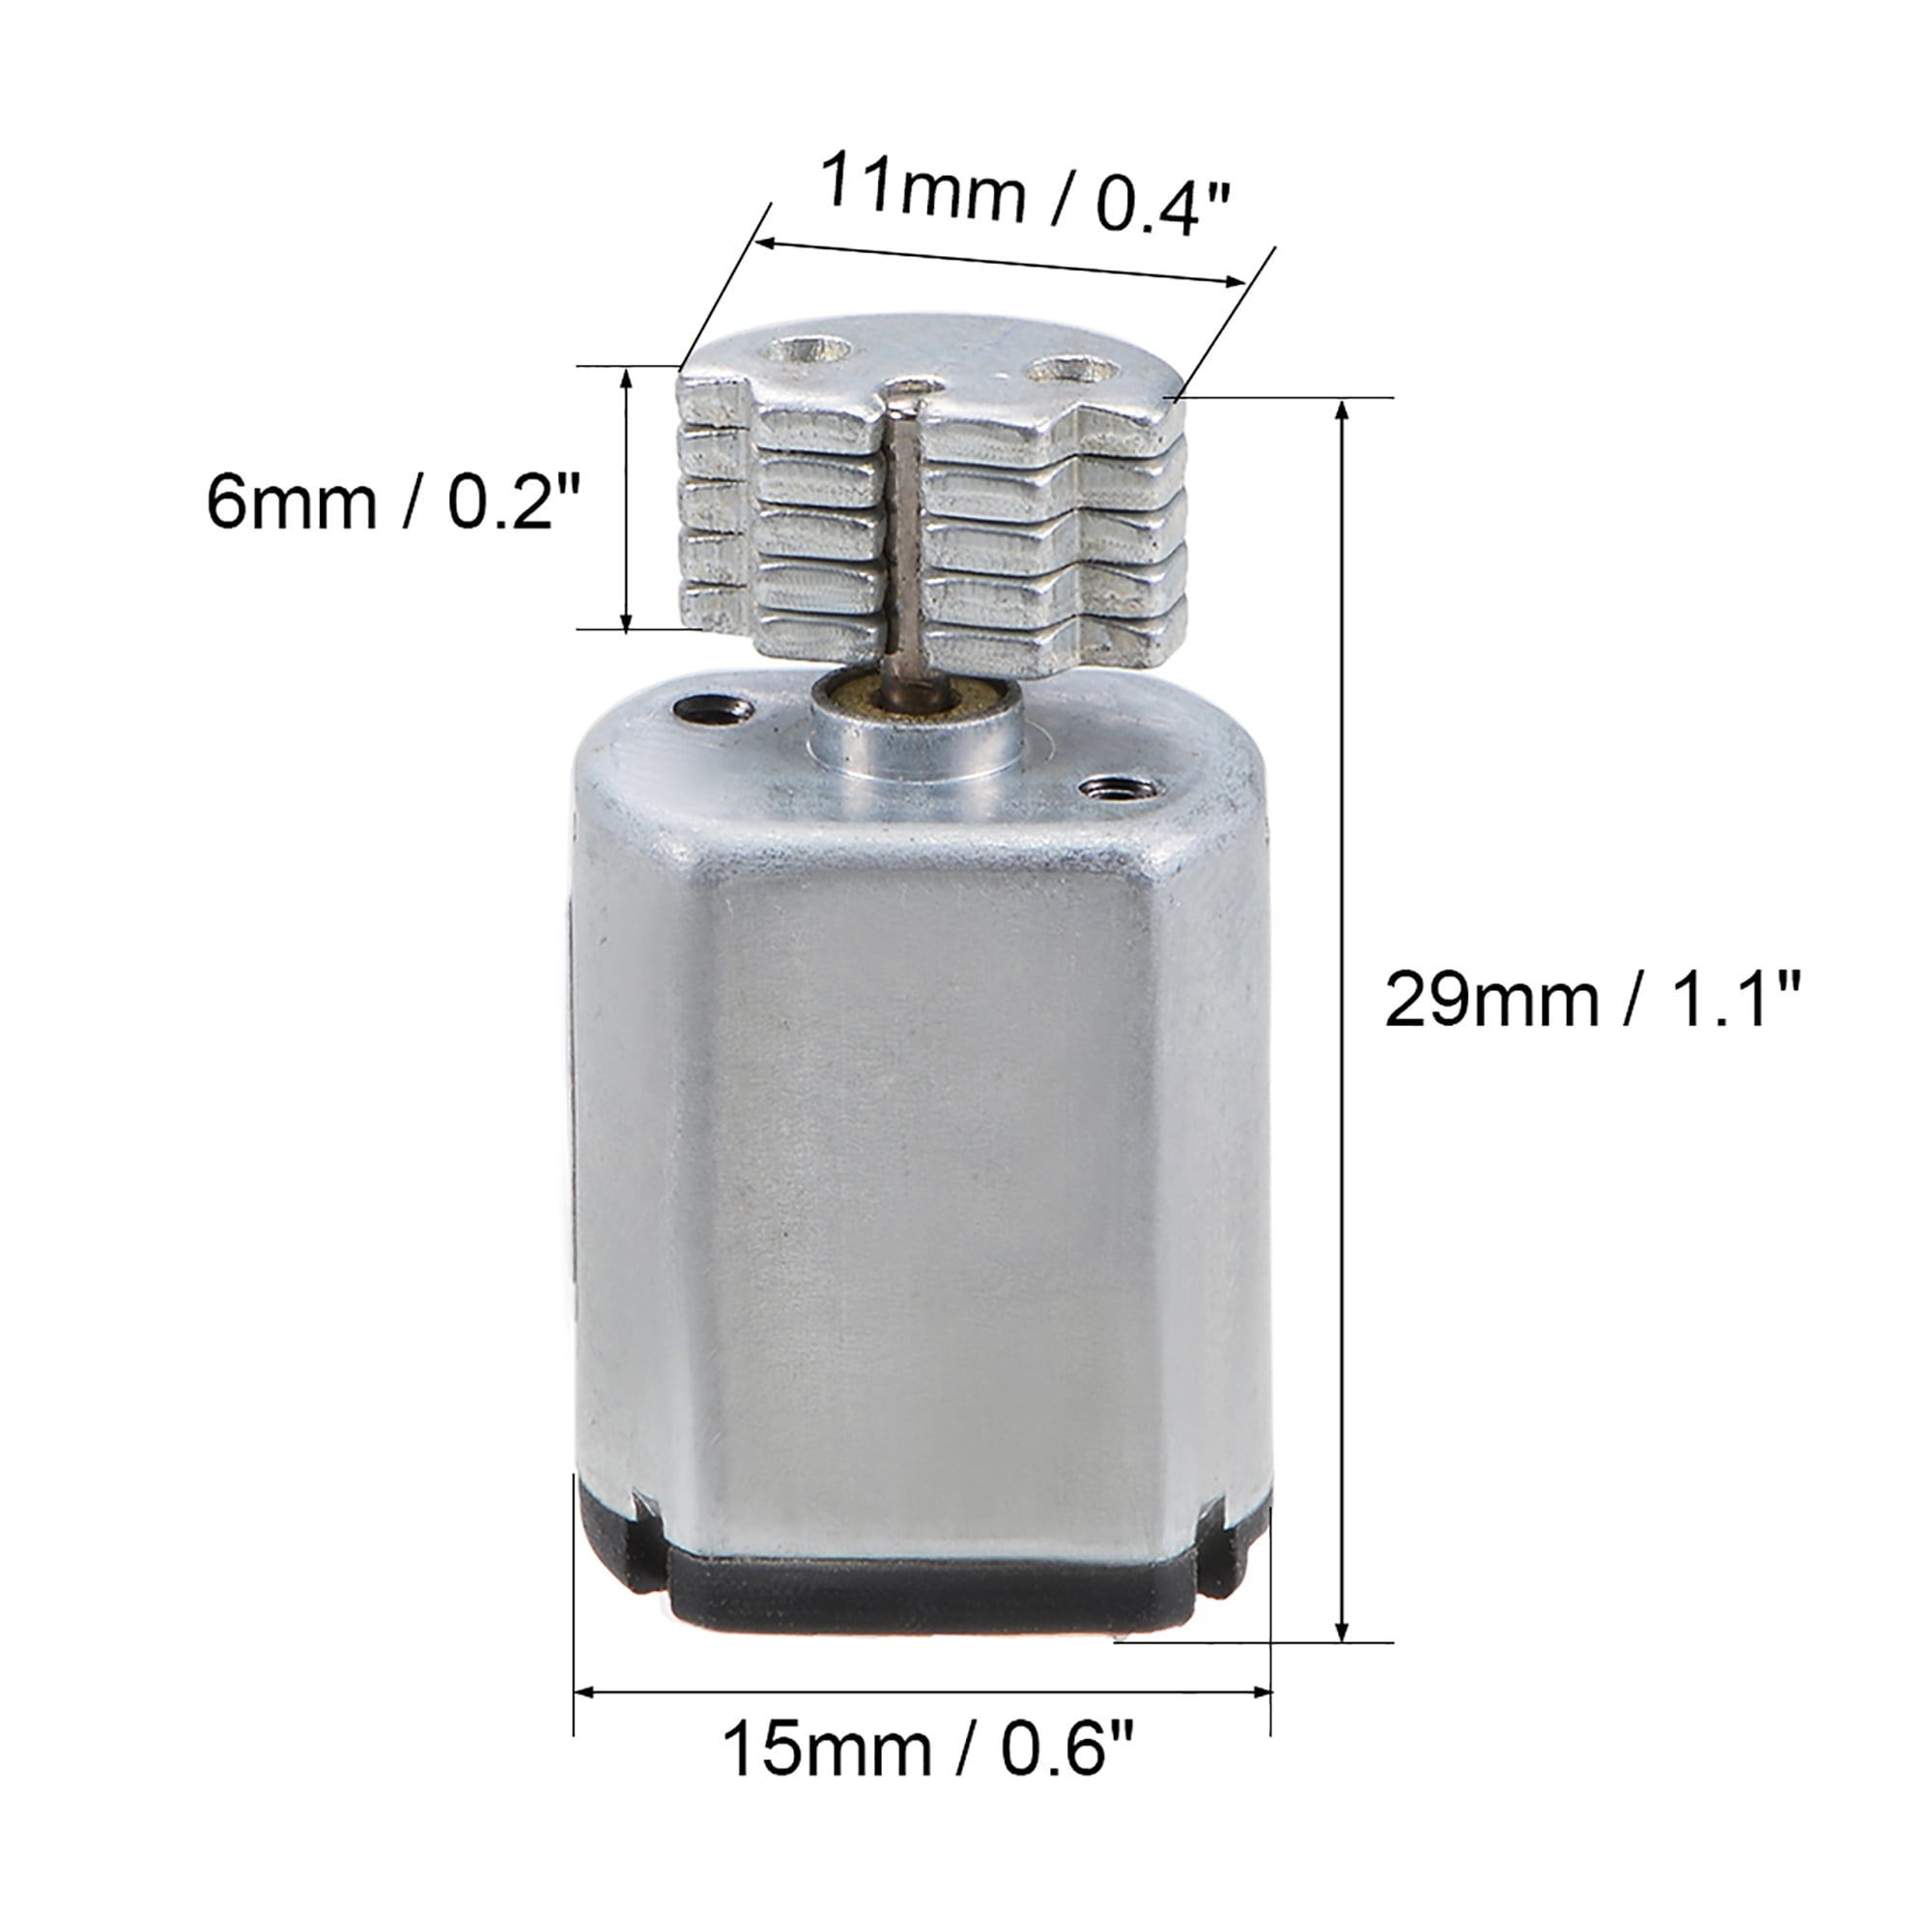 uxcell Vibration Motors DC 3V 40mA 4000RPM Vibrating Motor Strong Power for DIY Electric Massager 29x15x12mm 5Pcs